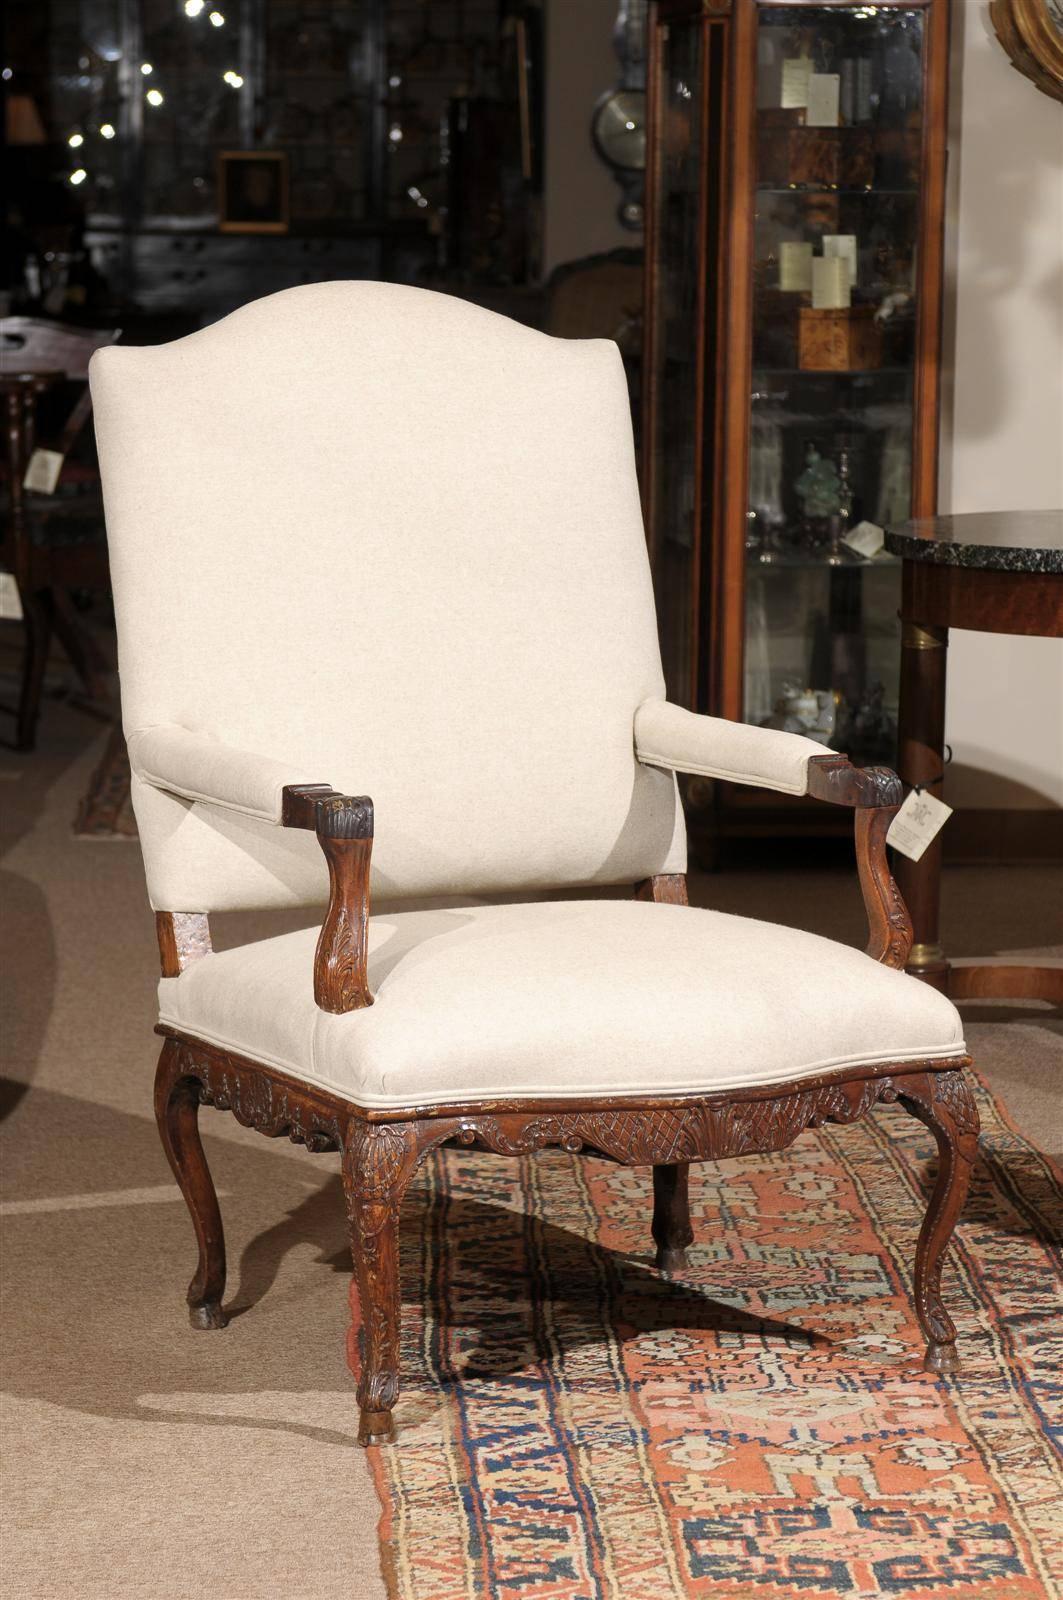 Large Regence period fauteuil with elaborate carving, France, circa 1720.